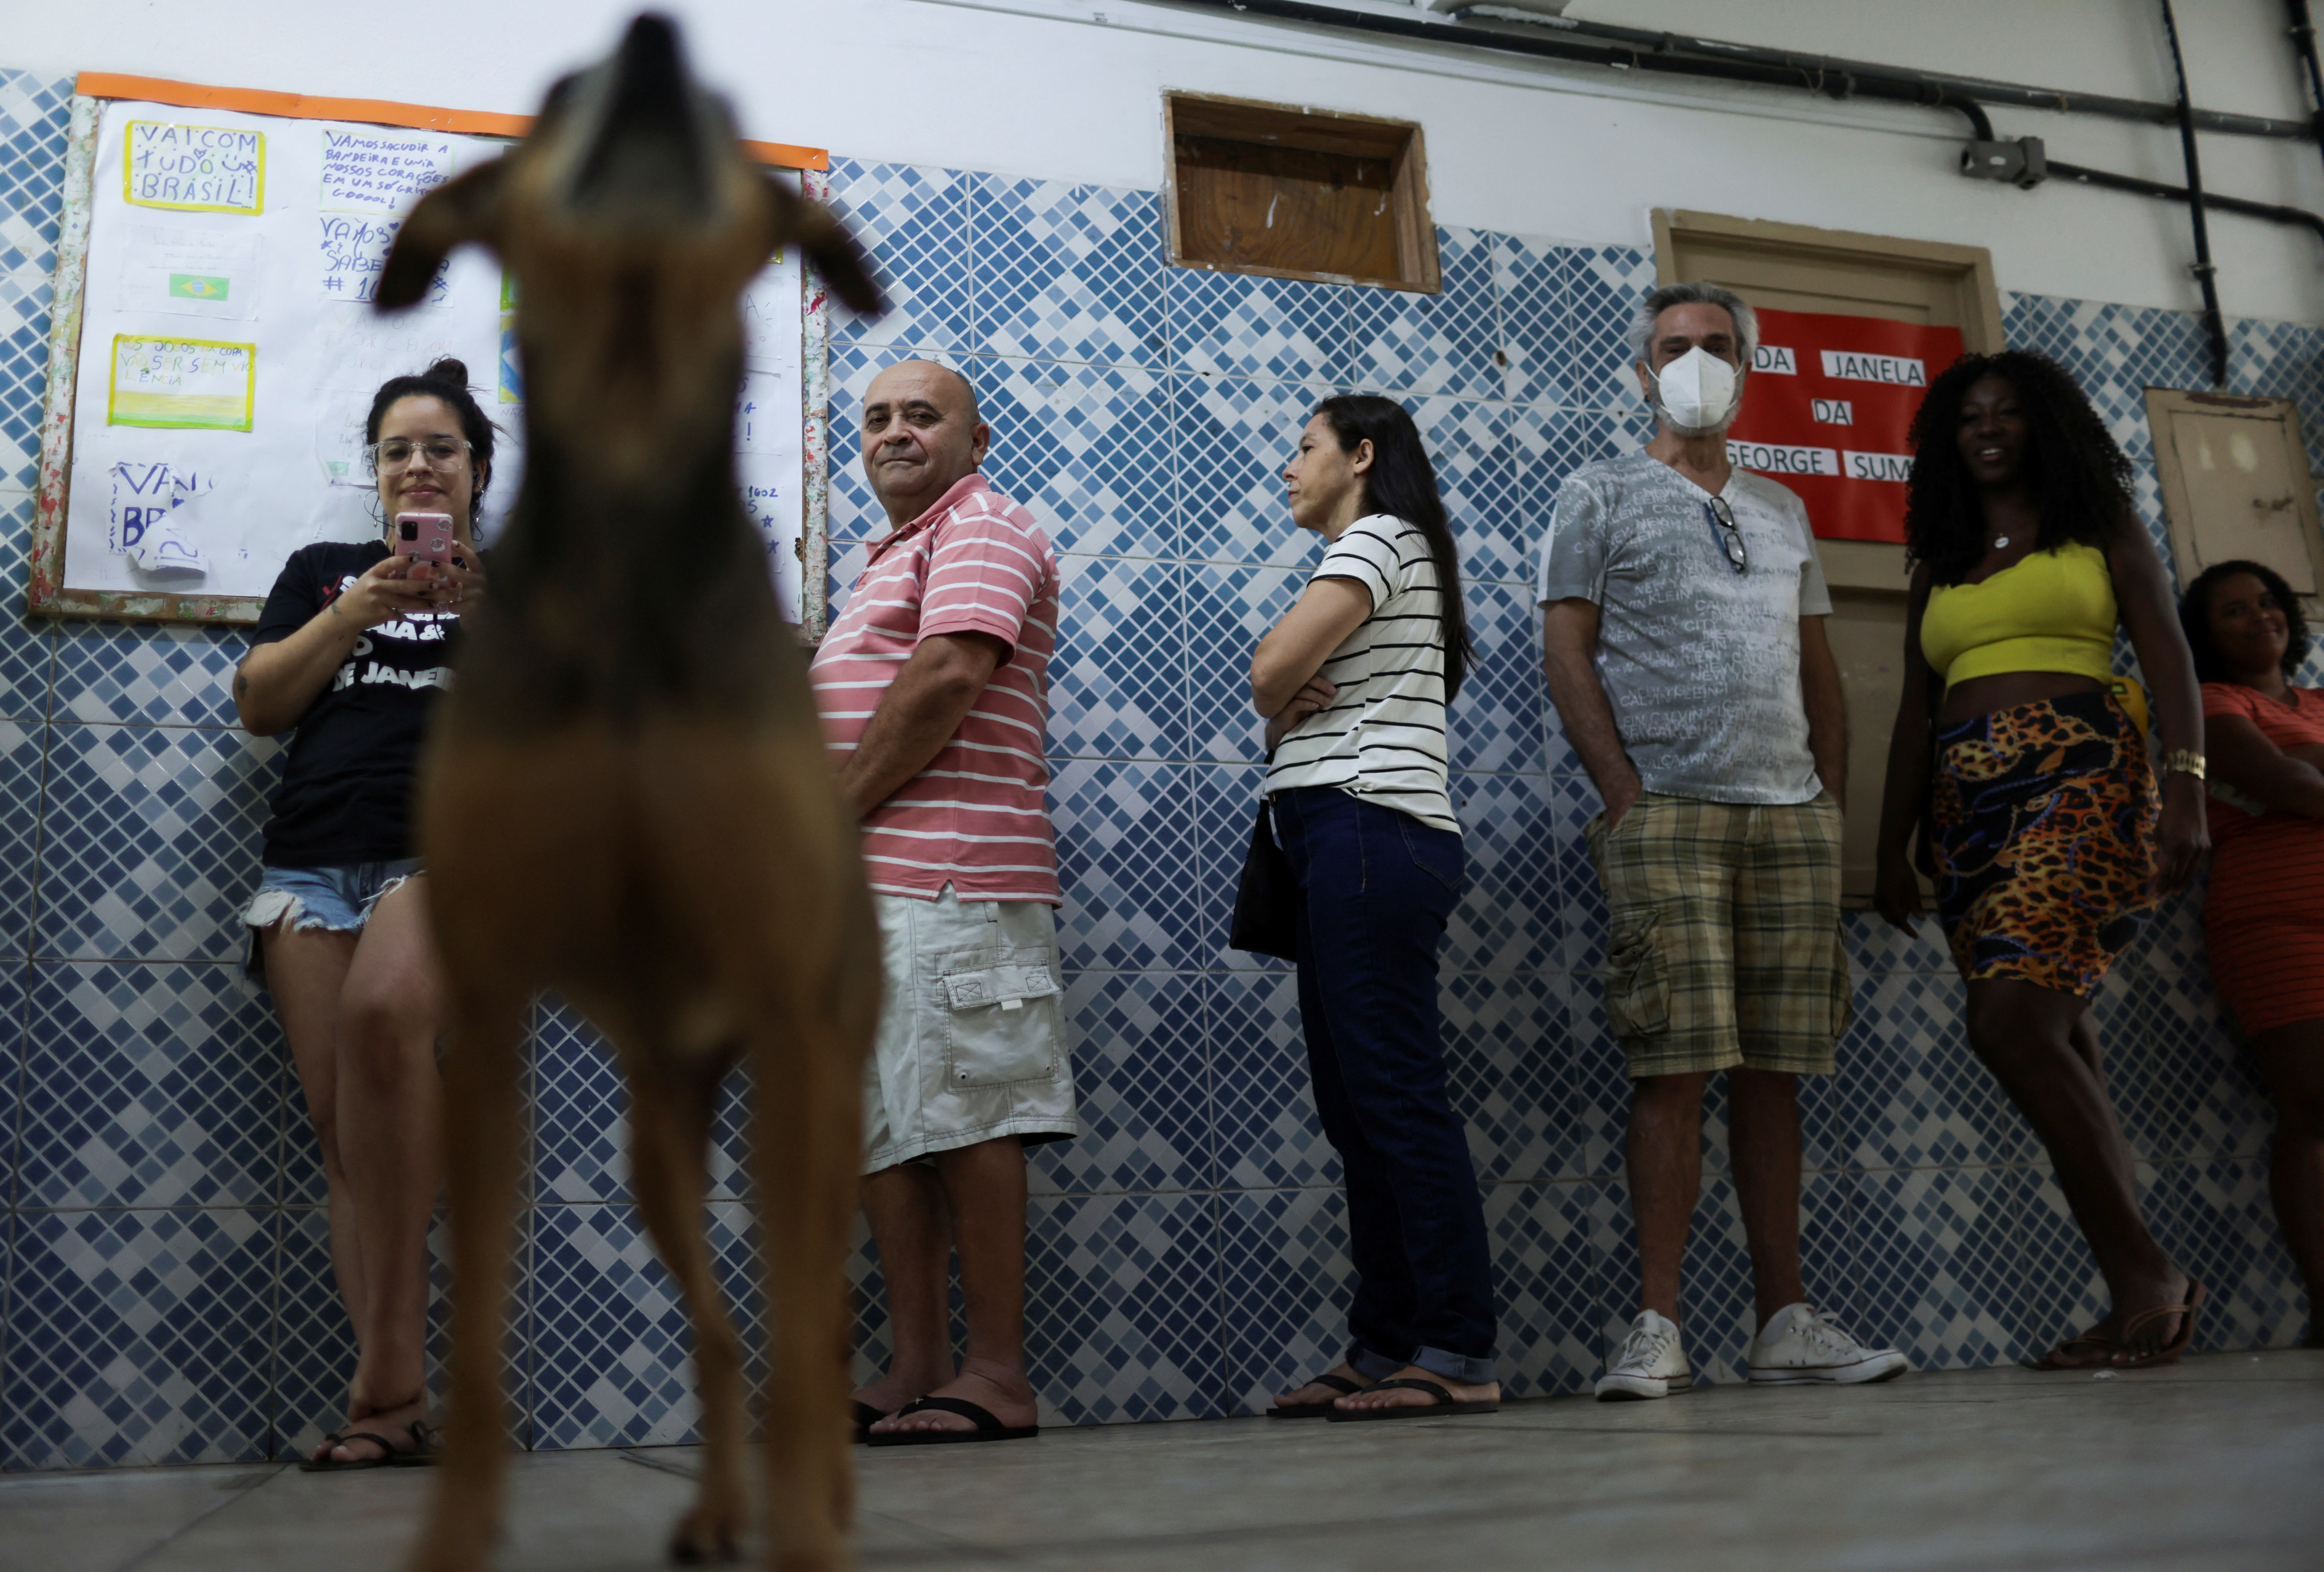 People wait to exercise their right to vote in Rio de Janeiro (REUTERS / Pilar Olivares)